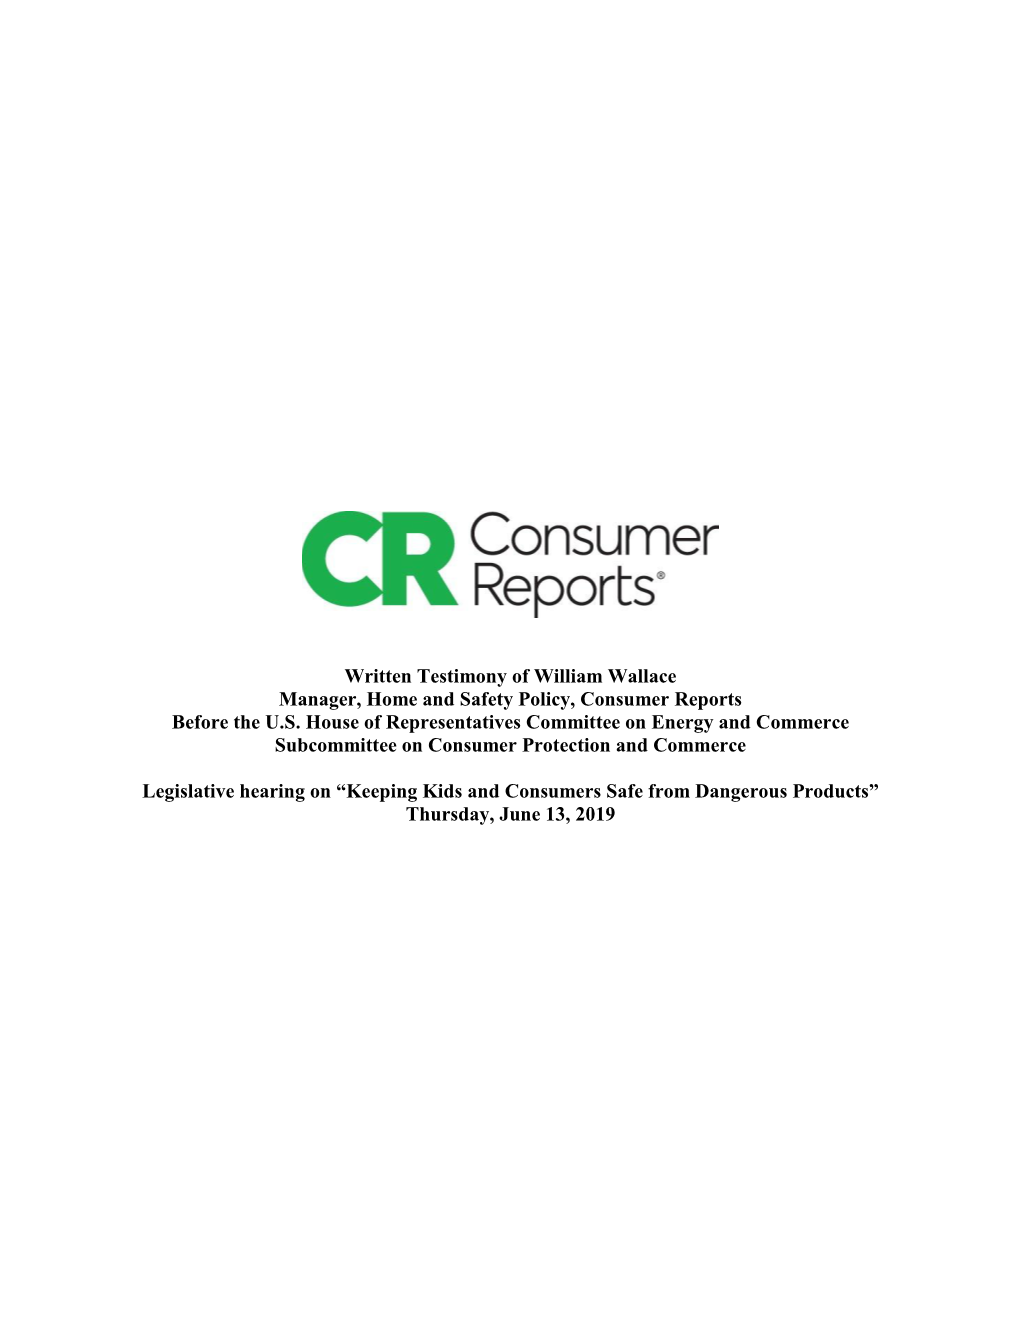 Written Testimony of William Wallace Manager, Home and Safety Policy, Consumer Reports Before the U.S. House of Representatives